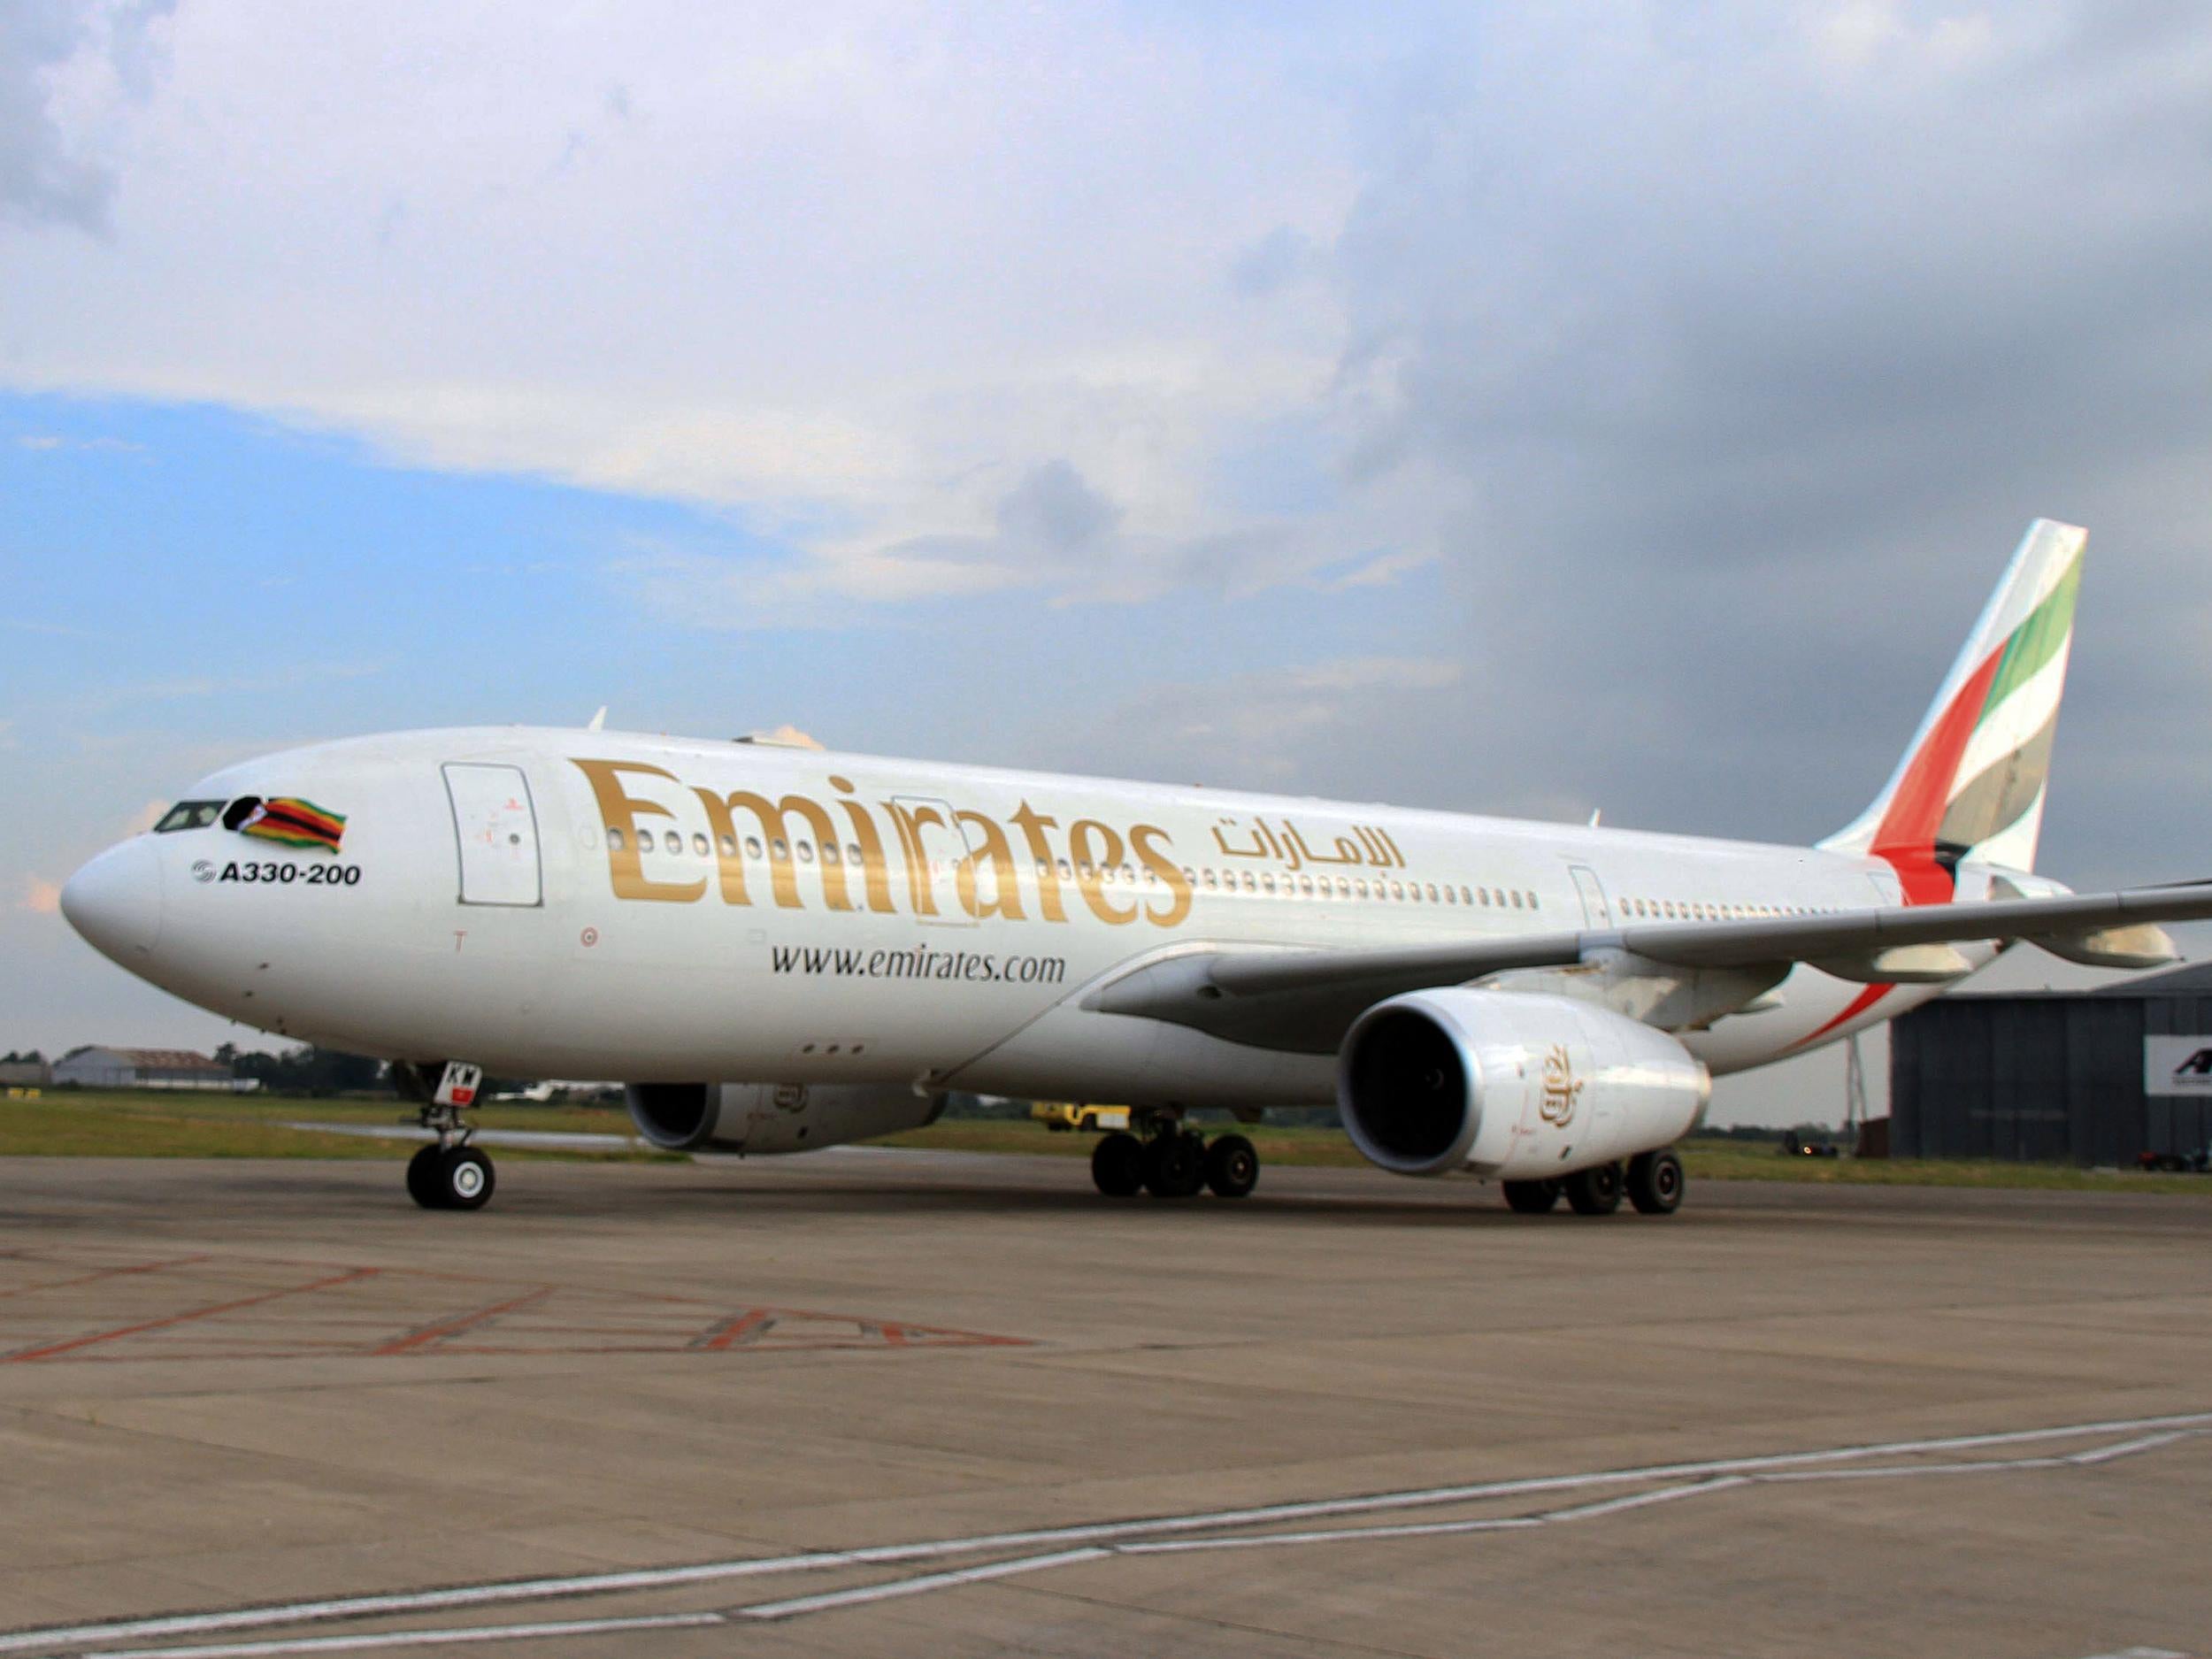 The "worst ever air-rage passenger" was arrested after an Emirates flight